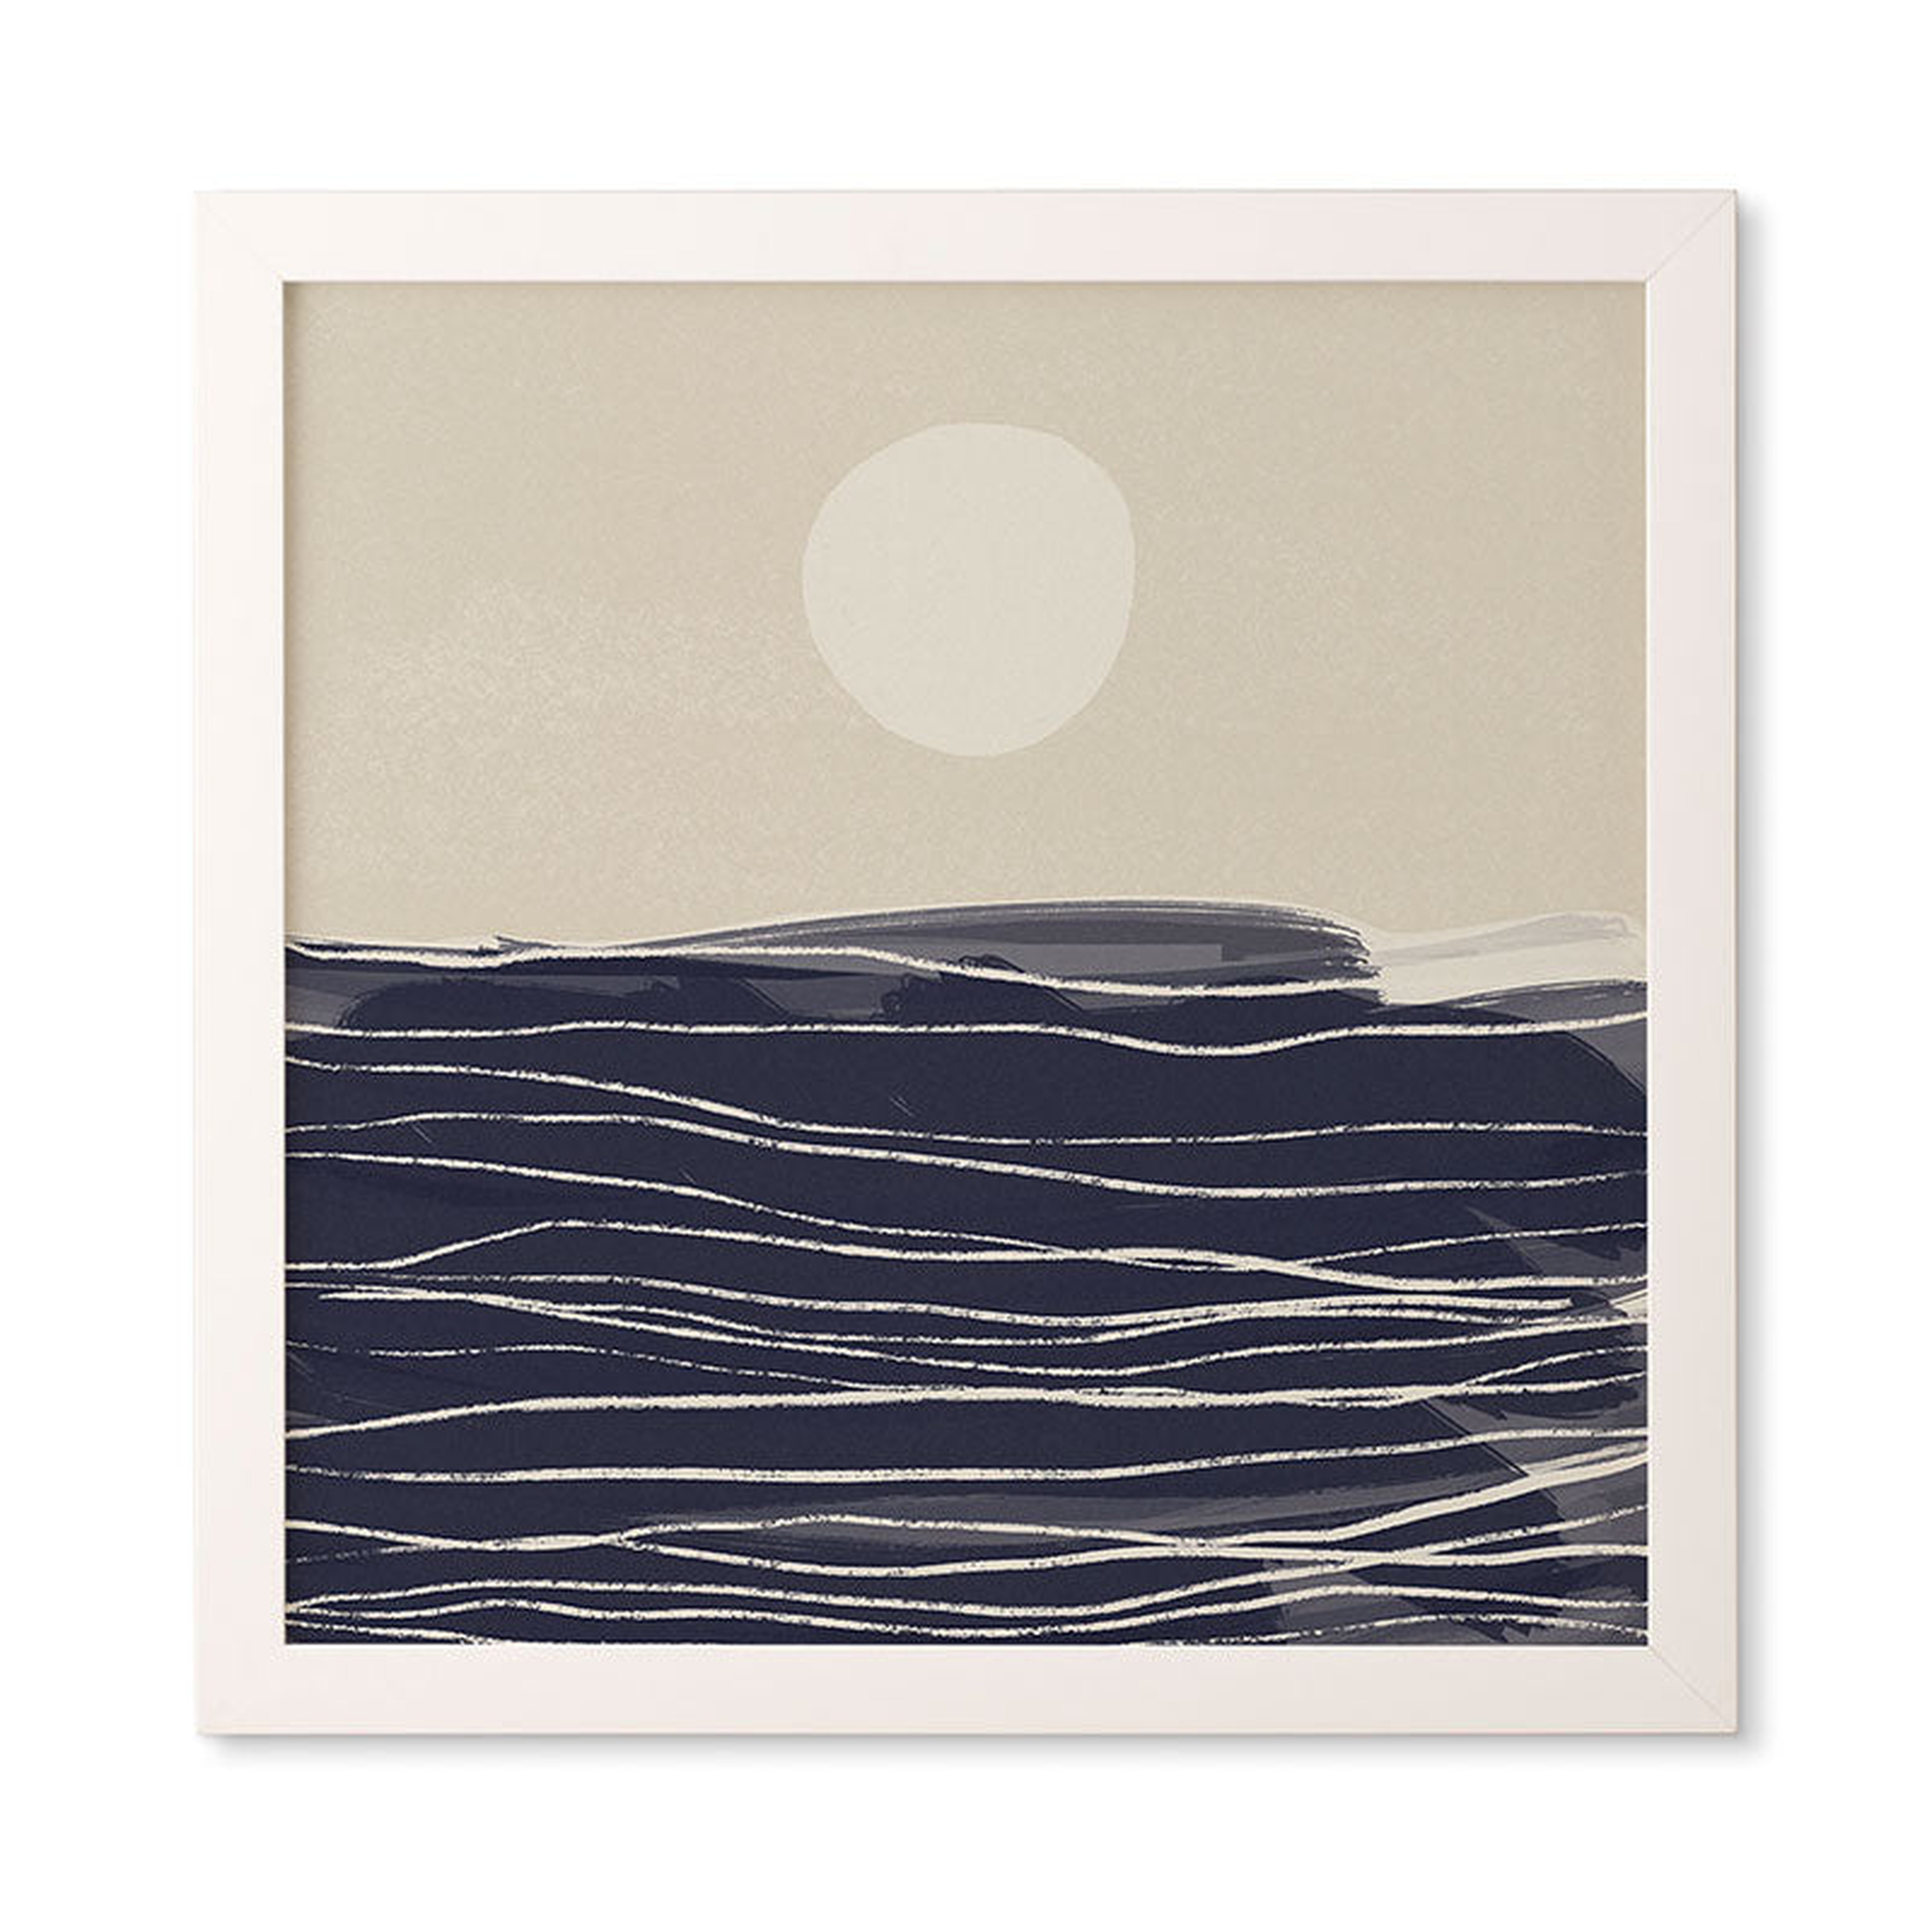 Abstract Seascape 2 by Alisa Galitsyna - Framed Wall Art Basic White 20" x 20" - Wander Print Co.